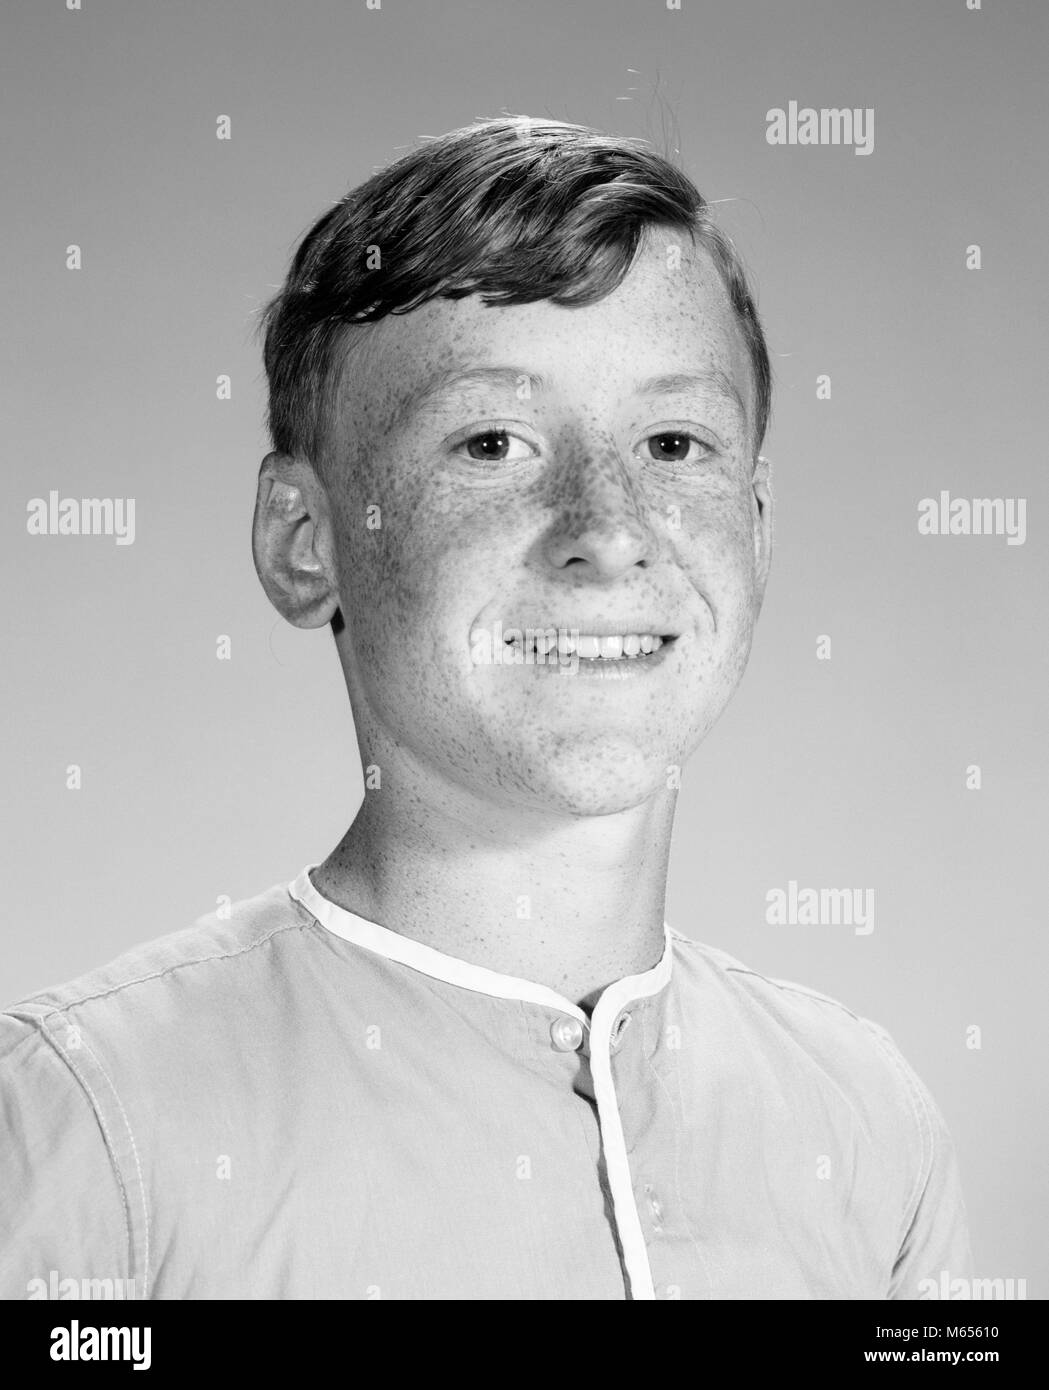 1960s 1970s PORTRAIT SMILING FRECKLE FACE TEEN BOY LOOKING AT CAMERA - b23695 HAR001 HARS CHEERFUL PRIDE GROWTH SMILES JOYFUL IMAGINATION TEENAGED INTERESTED EAGER JUVENILES MALES PRE-TEEN PRE-TEEN BOY ATTENTIVE B&W BLACK AND WHITE CAUCASIAN ETHNICITY FRECKLE FRECKLE FACE LOOKING AT CAMERA OLD FASHIONED PERSONS Stock Photo